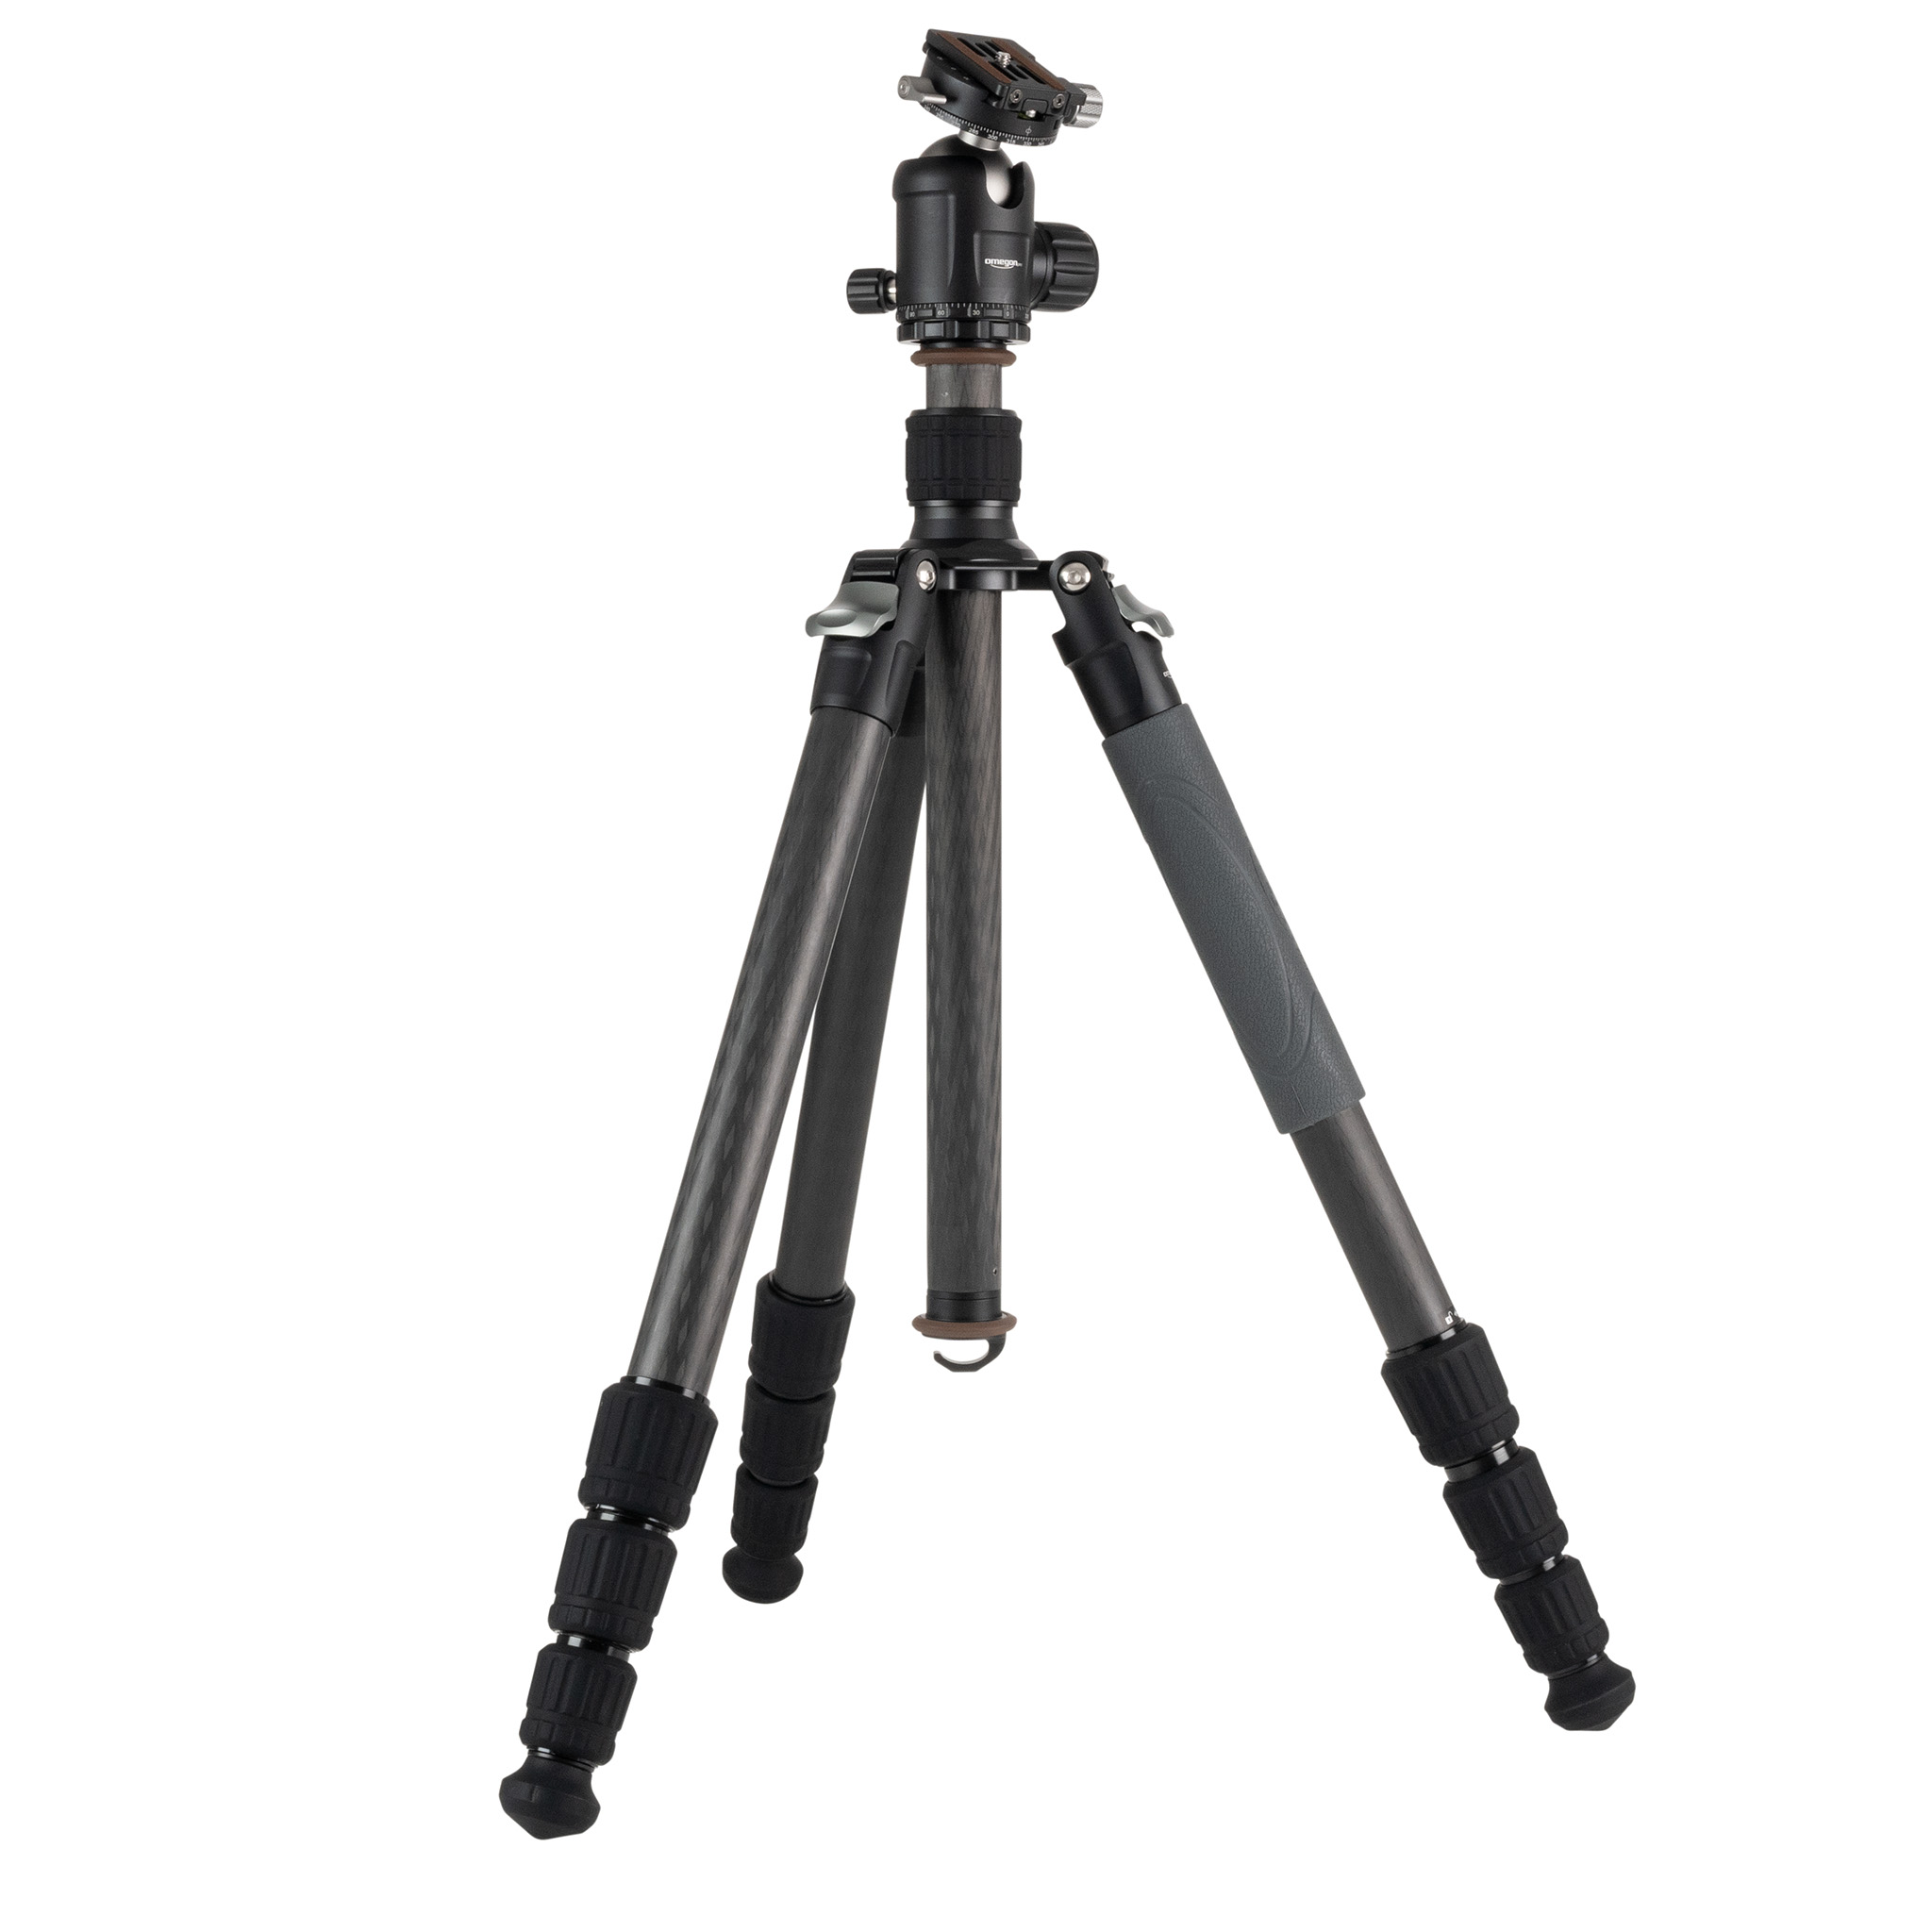 Omegon Pro carbon tripod including ball head